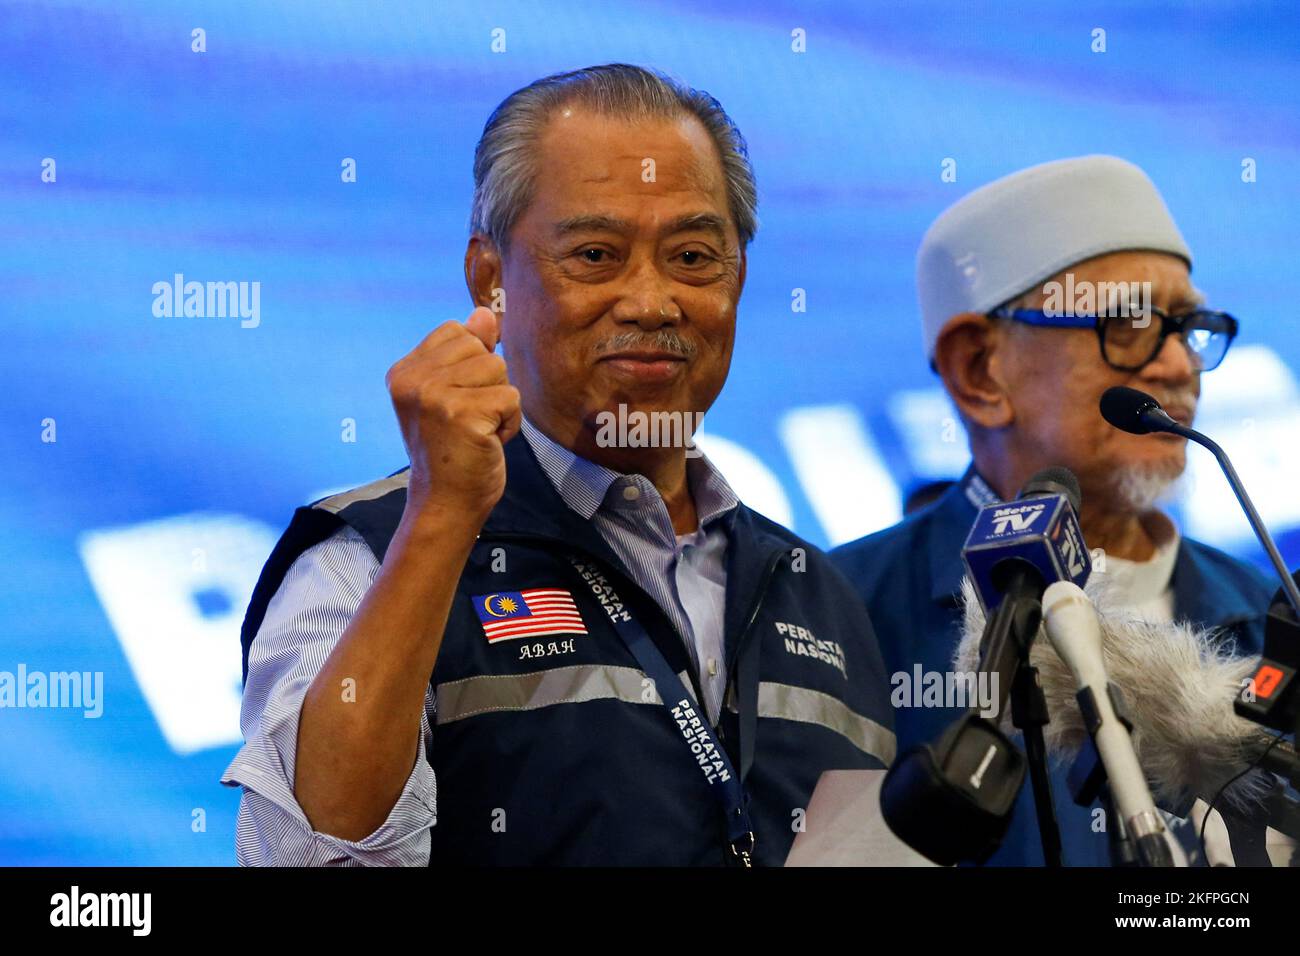 Malaysian former Prime Minister and Perikatan Nasional Chairman Muhyiddin Yassin gestures during a news conference after Malaysia's 15th general election in Shah Alam, Malaysia November 20, 2022. REUTERS/Lai Seng Sin Stock Photo